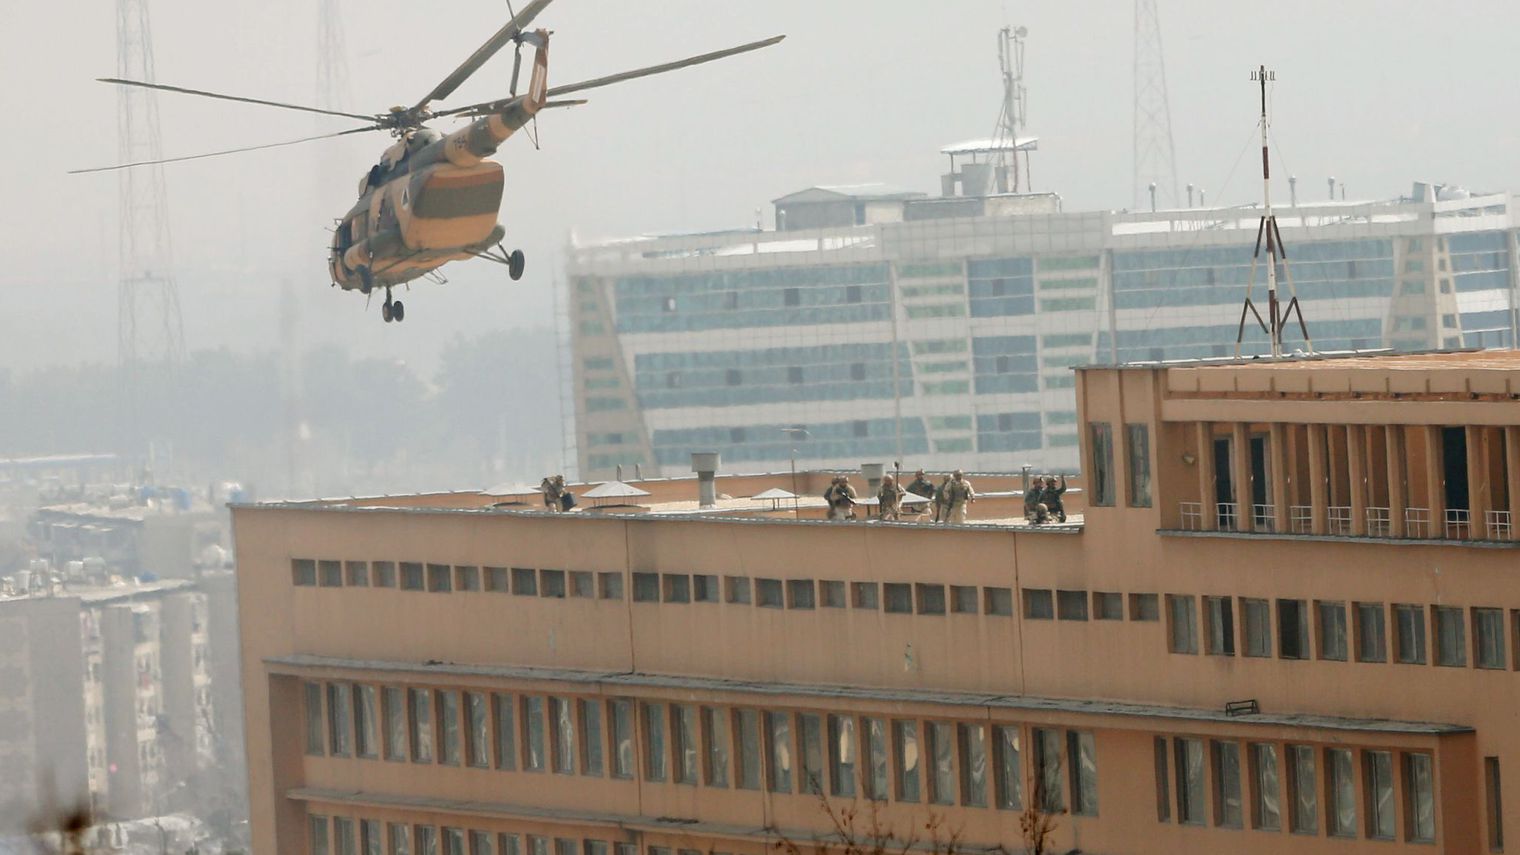 afghan-national-army-ana-soldiers-descend-from-helicopter-on-a-roof-of-a-military-hospital-during-gunfire-and-blast-in-kabul-afghanistan_5839179.jpg